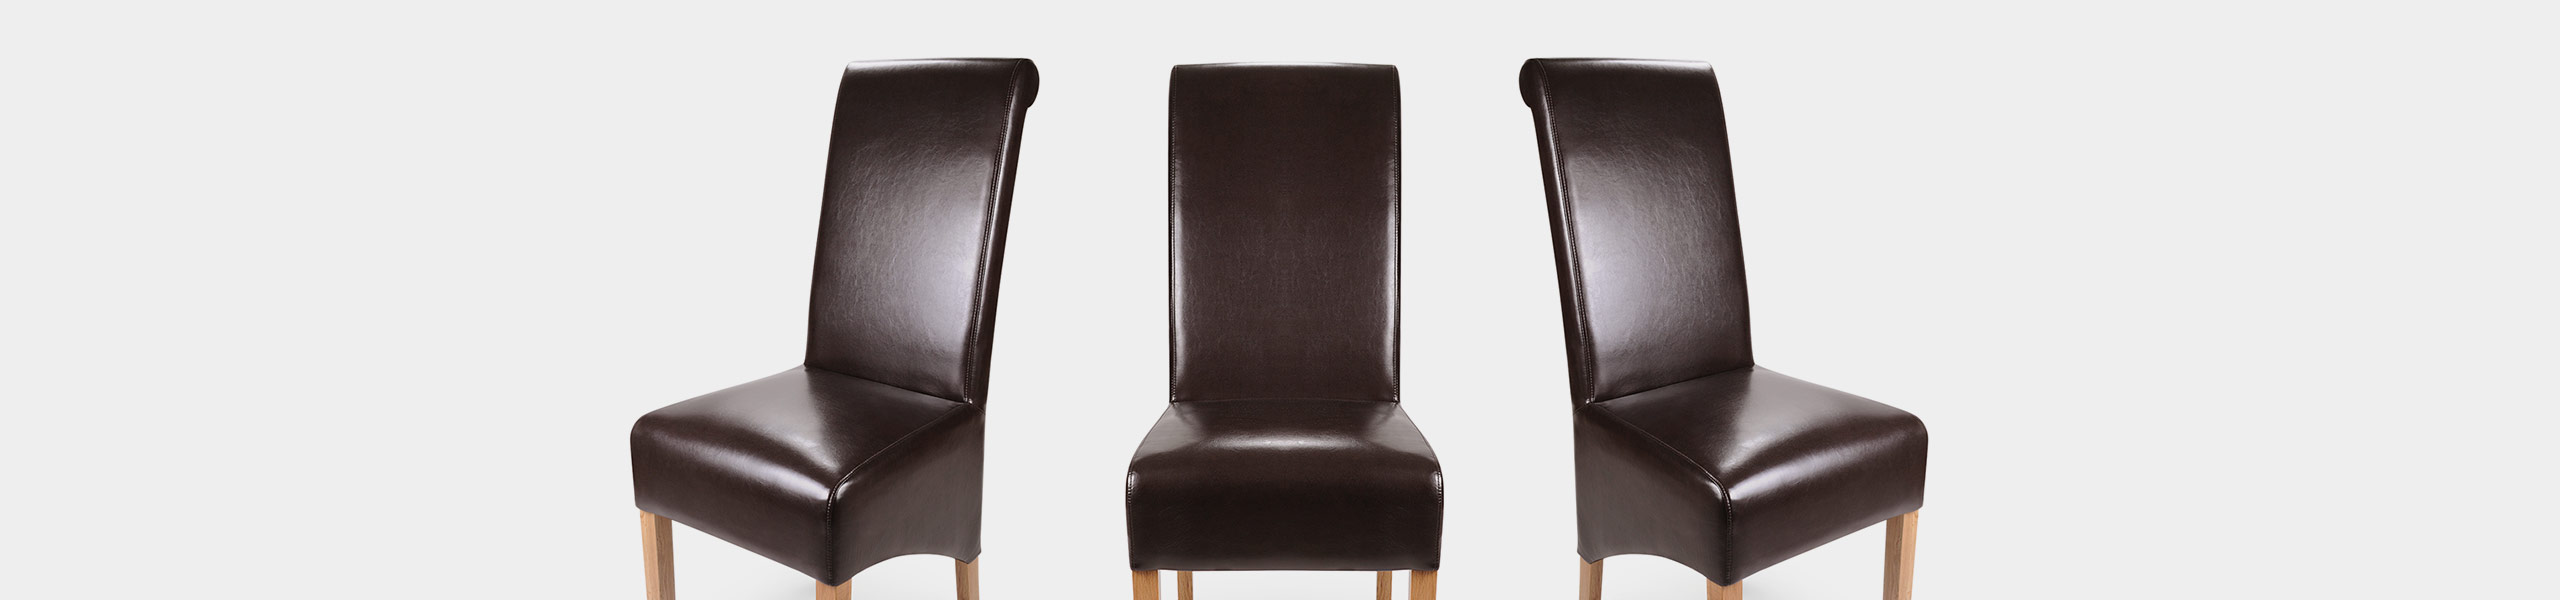 Krista Dining Chair Brown Leather Video Banner